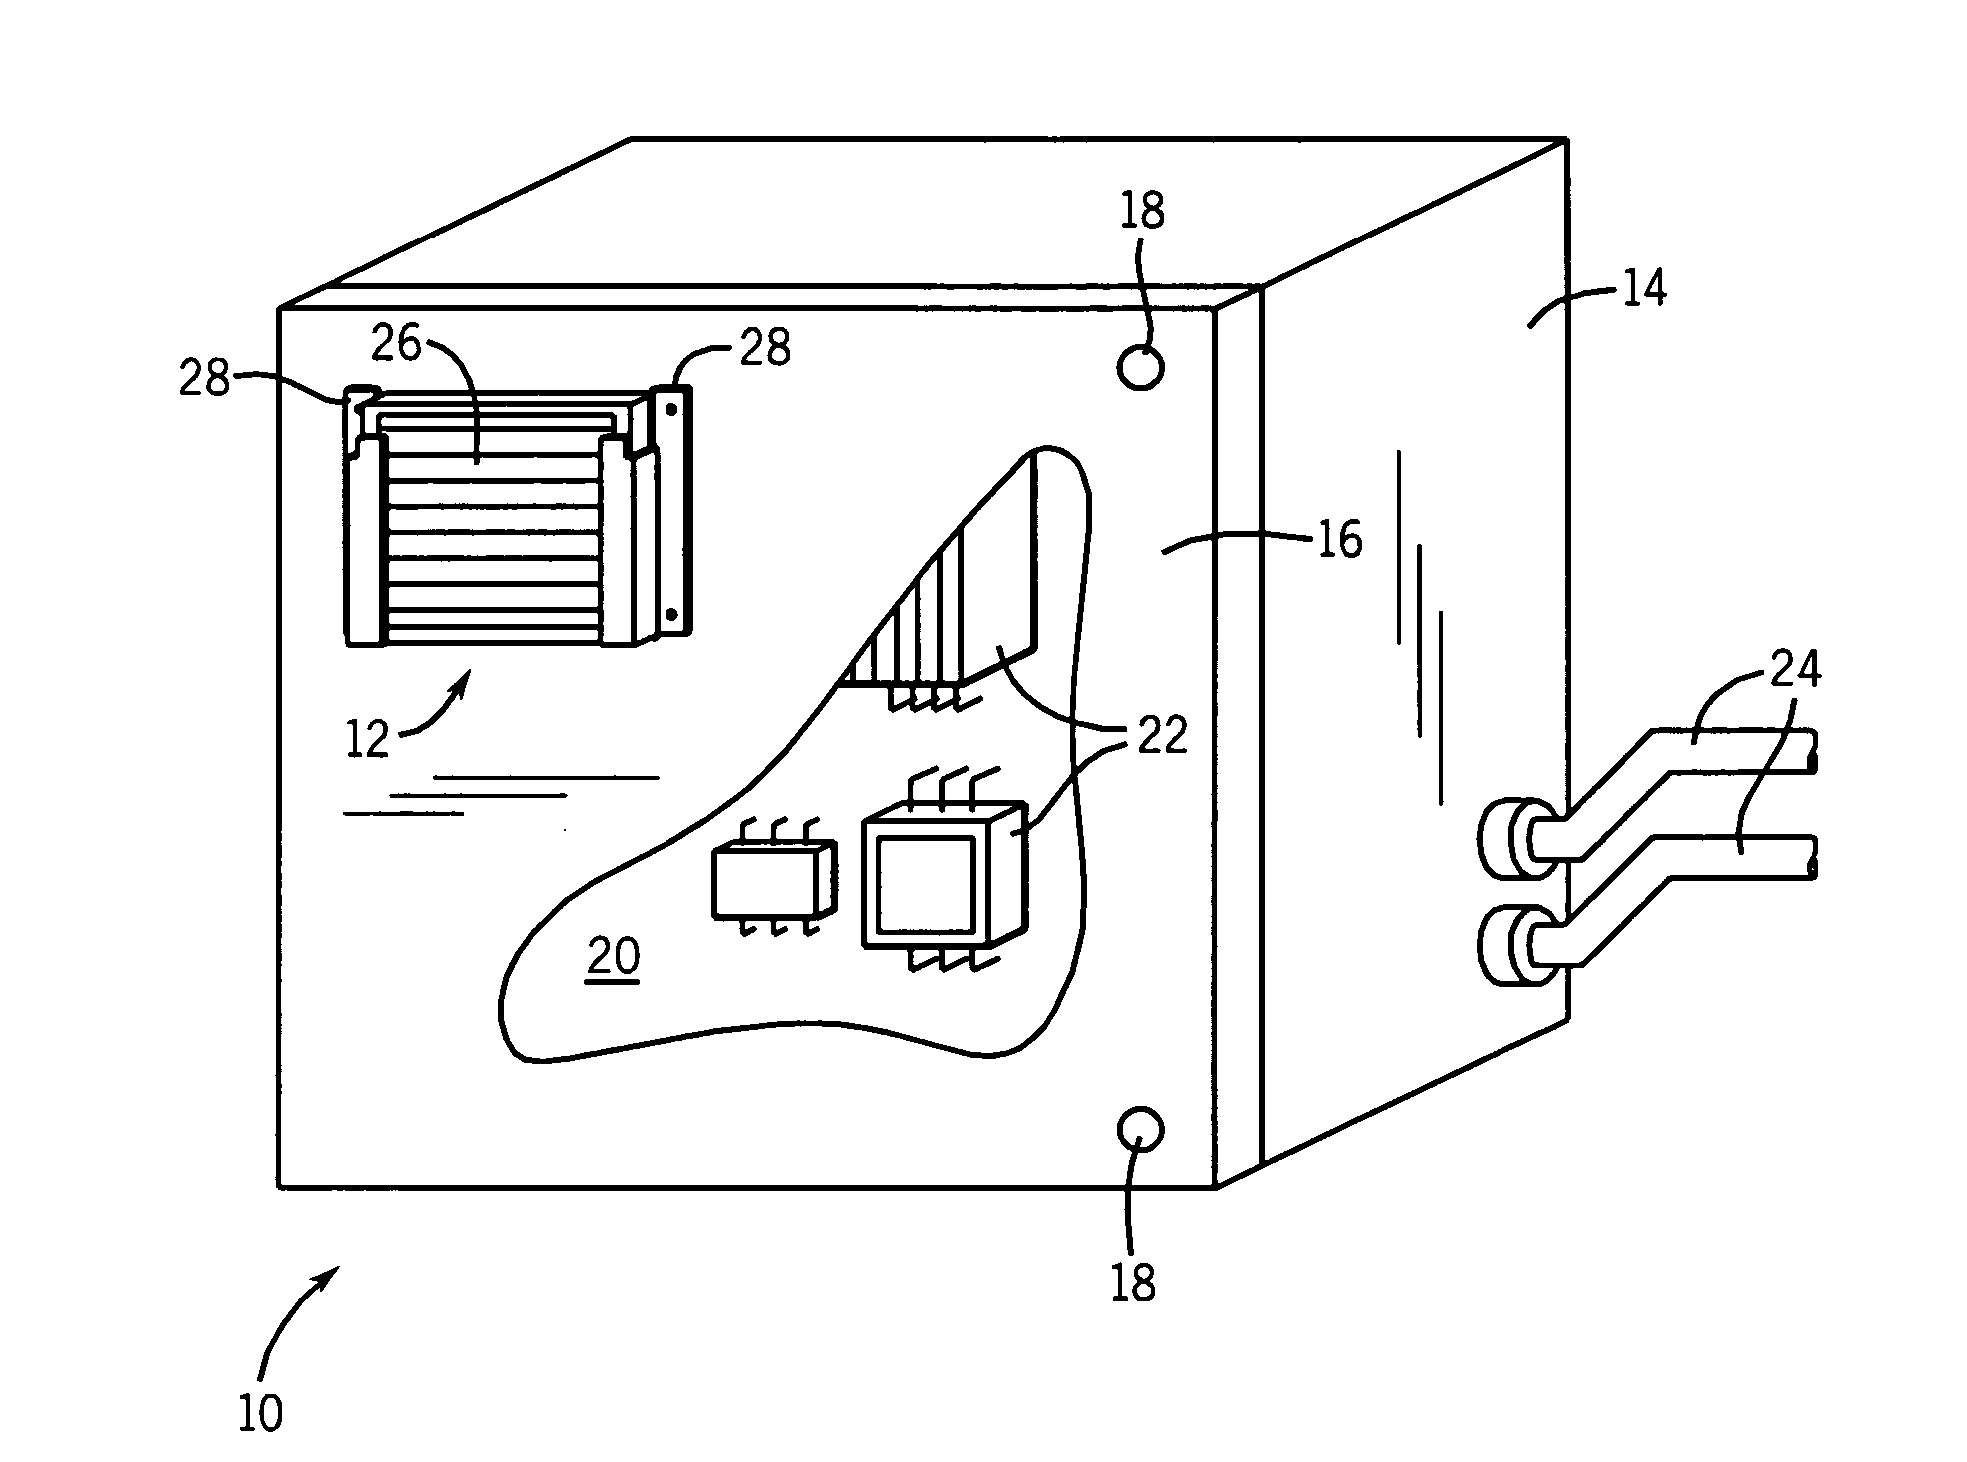 Arc resistant baffle for reducing arc-flash energy in an electrical enclosure